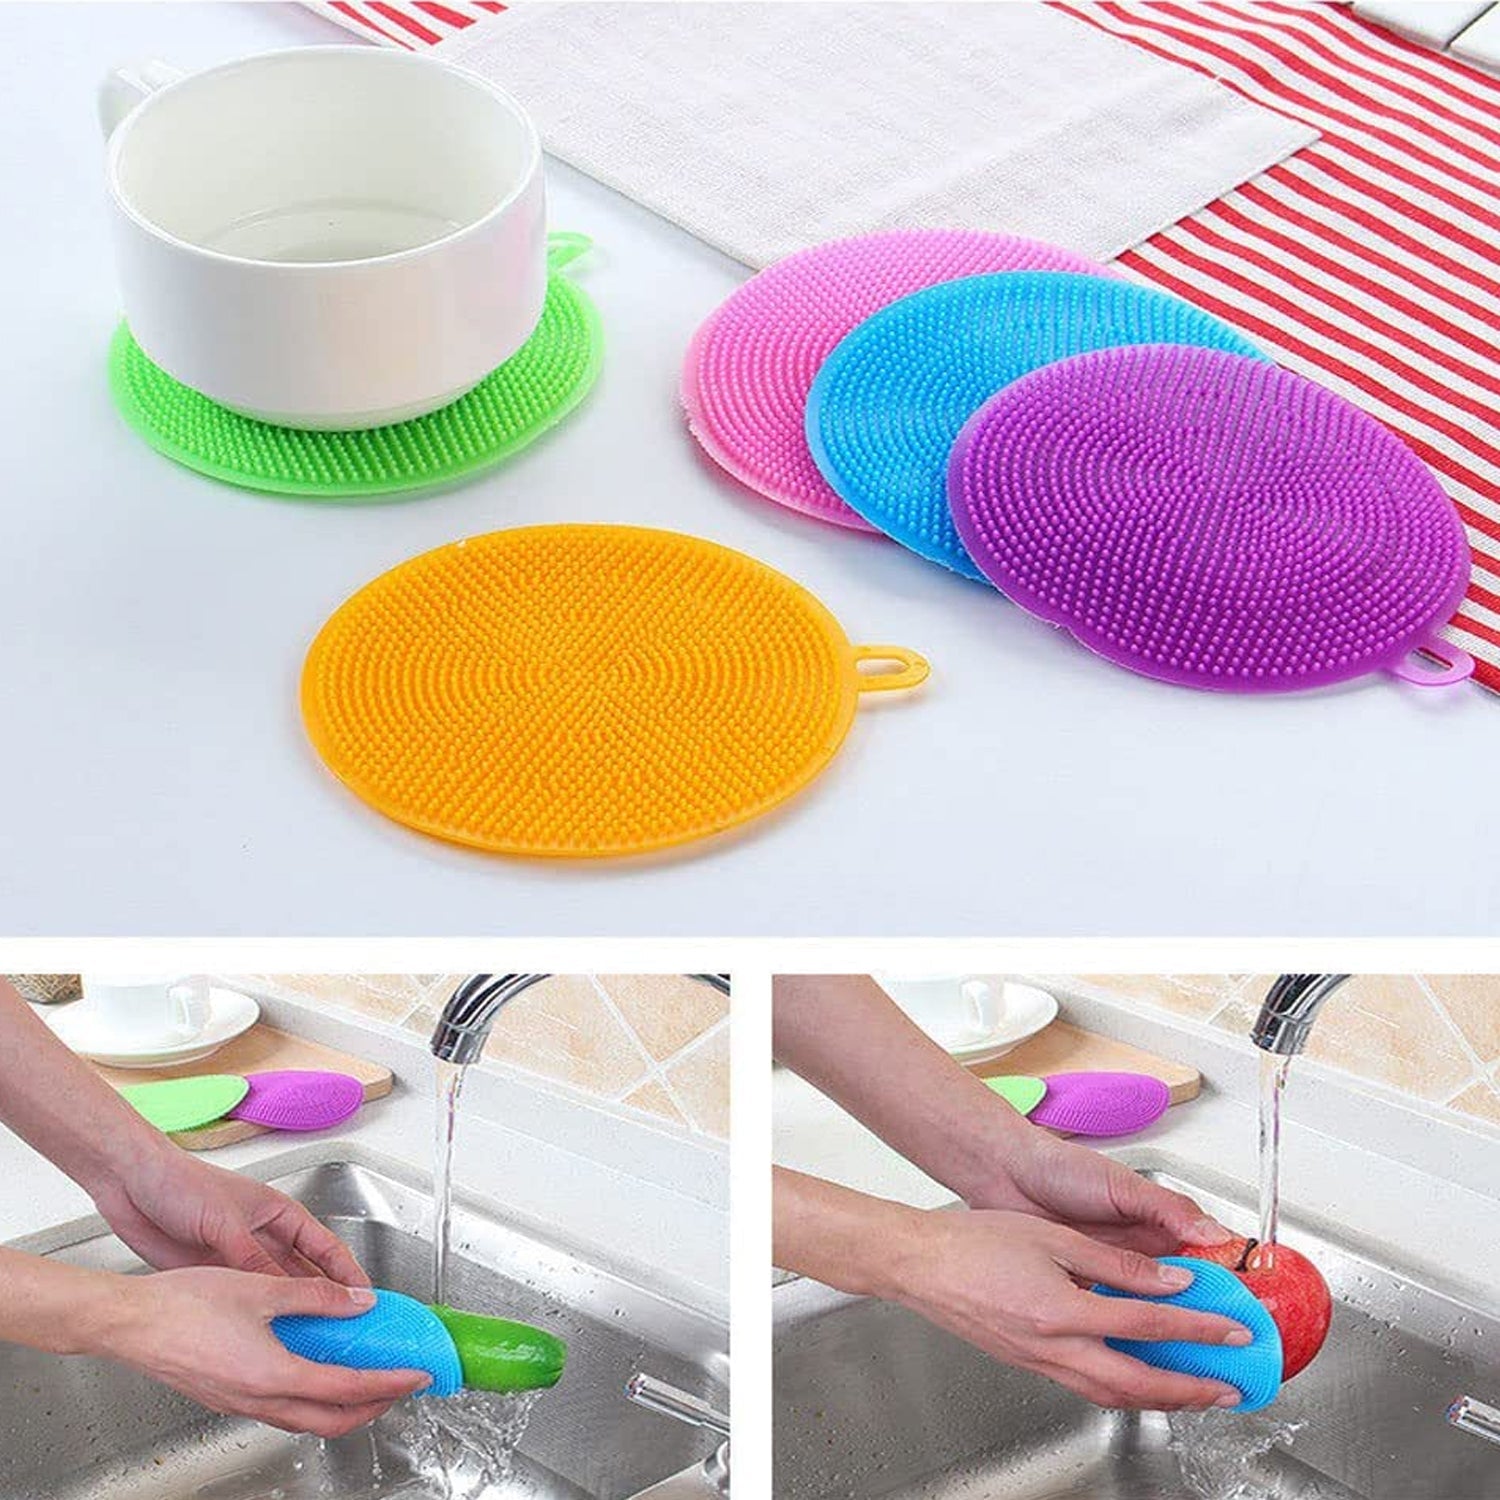 1344A Cleaning Supplies Sponges Silicone Scrubber for Kitchen Non Stick Dishwashing & Baby Care Sponge Brush Household Health Tool( Pack of 5pc). DeoDap